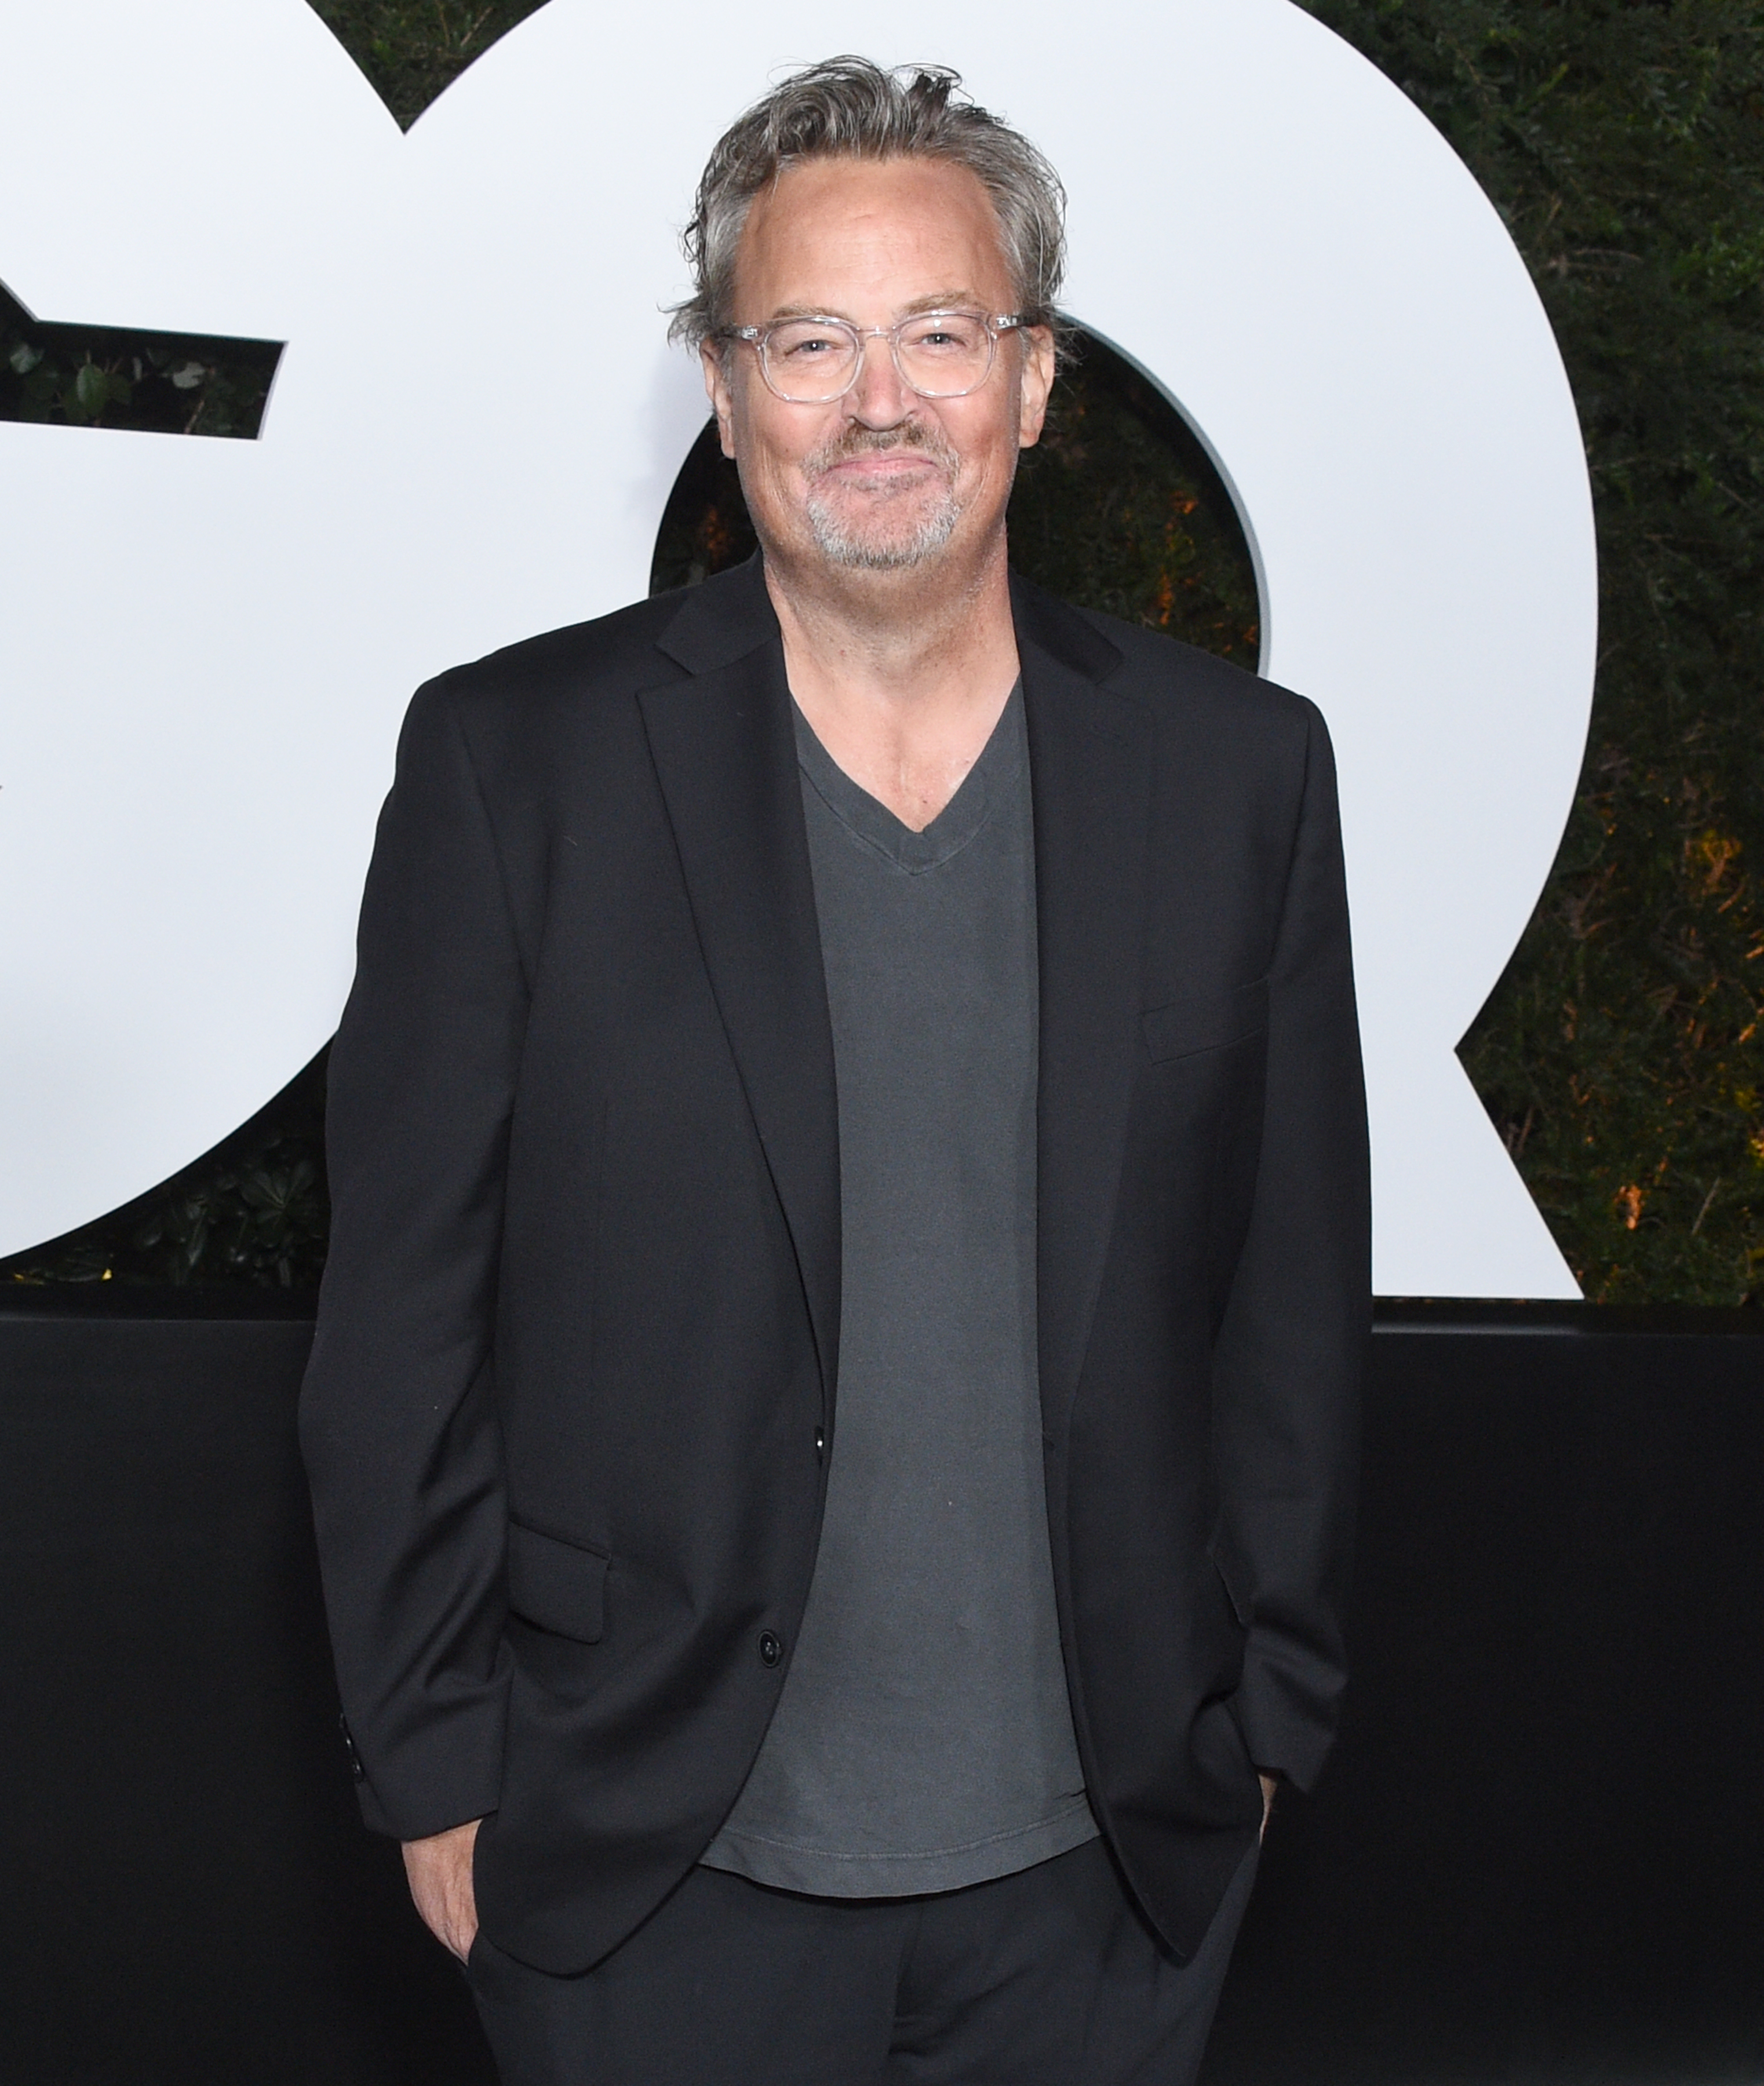 Matthew Perry tragically drowned in his hot tub in October